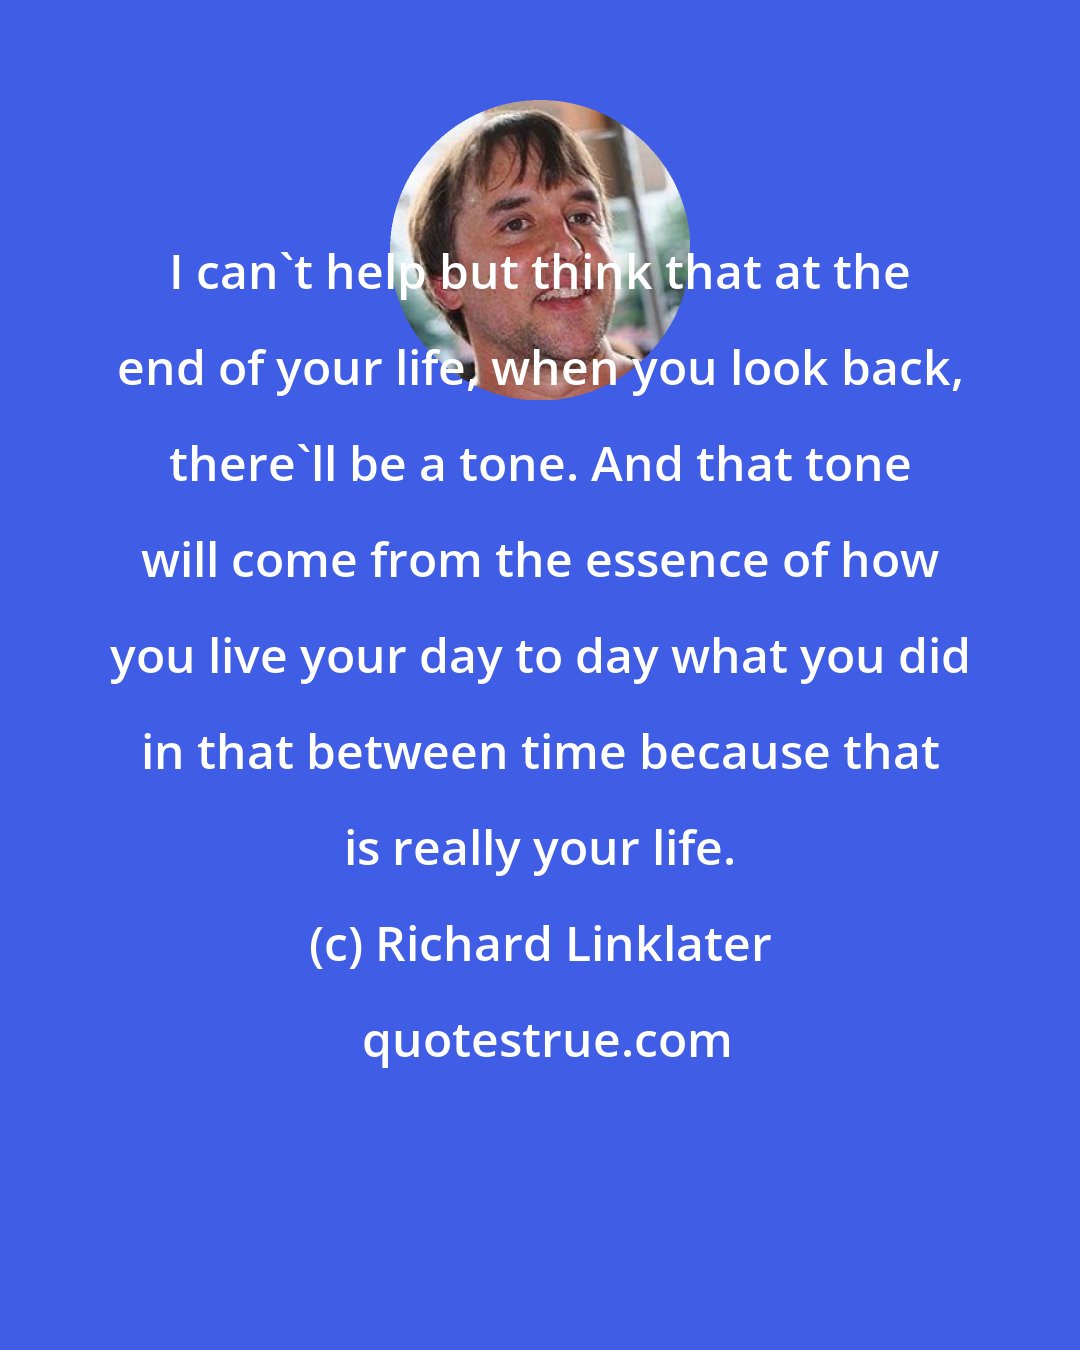 Richard Linklater: I can't help but think that at the end of your life, when you look back, there'll be a tone. And that tone will come from the essence of how you live your day to day what you did in that between time because that is really your life.